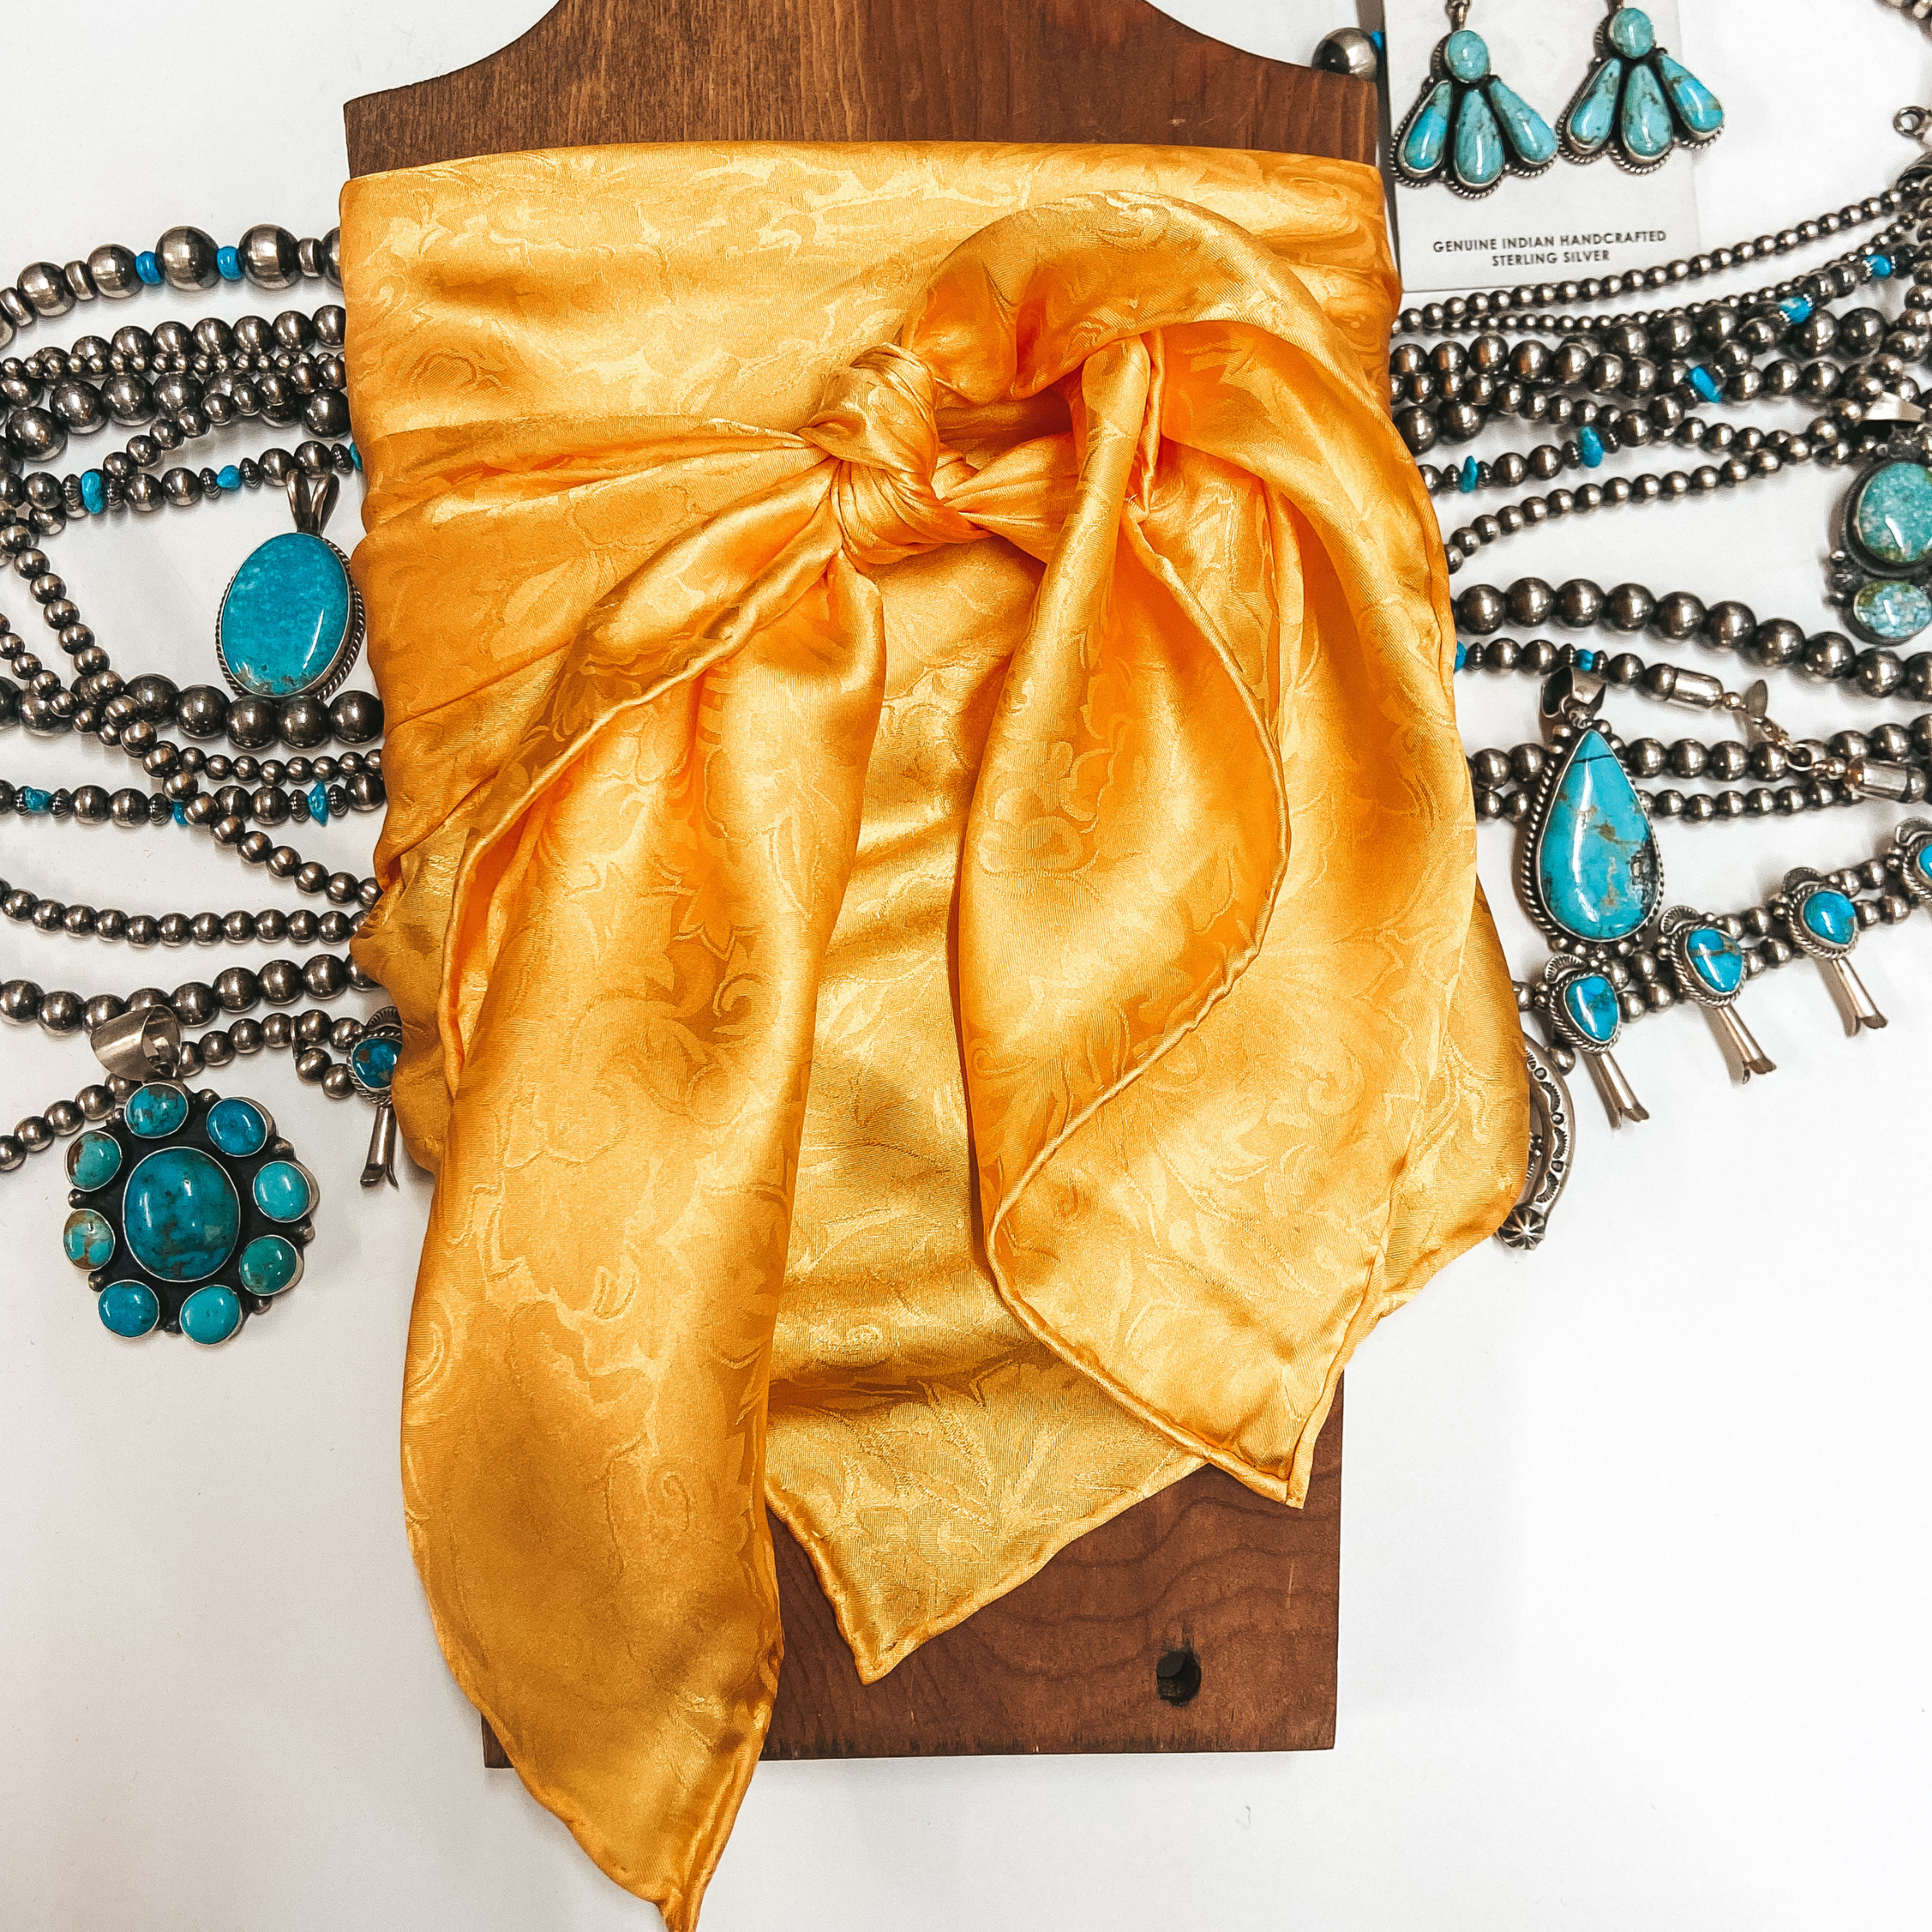 Jacquard Wild Rag in Yellow - Giddy Up Glamour Boutique